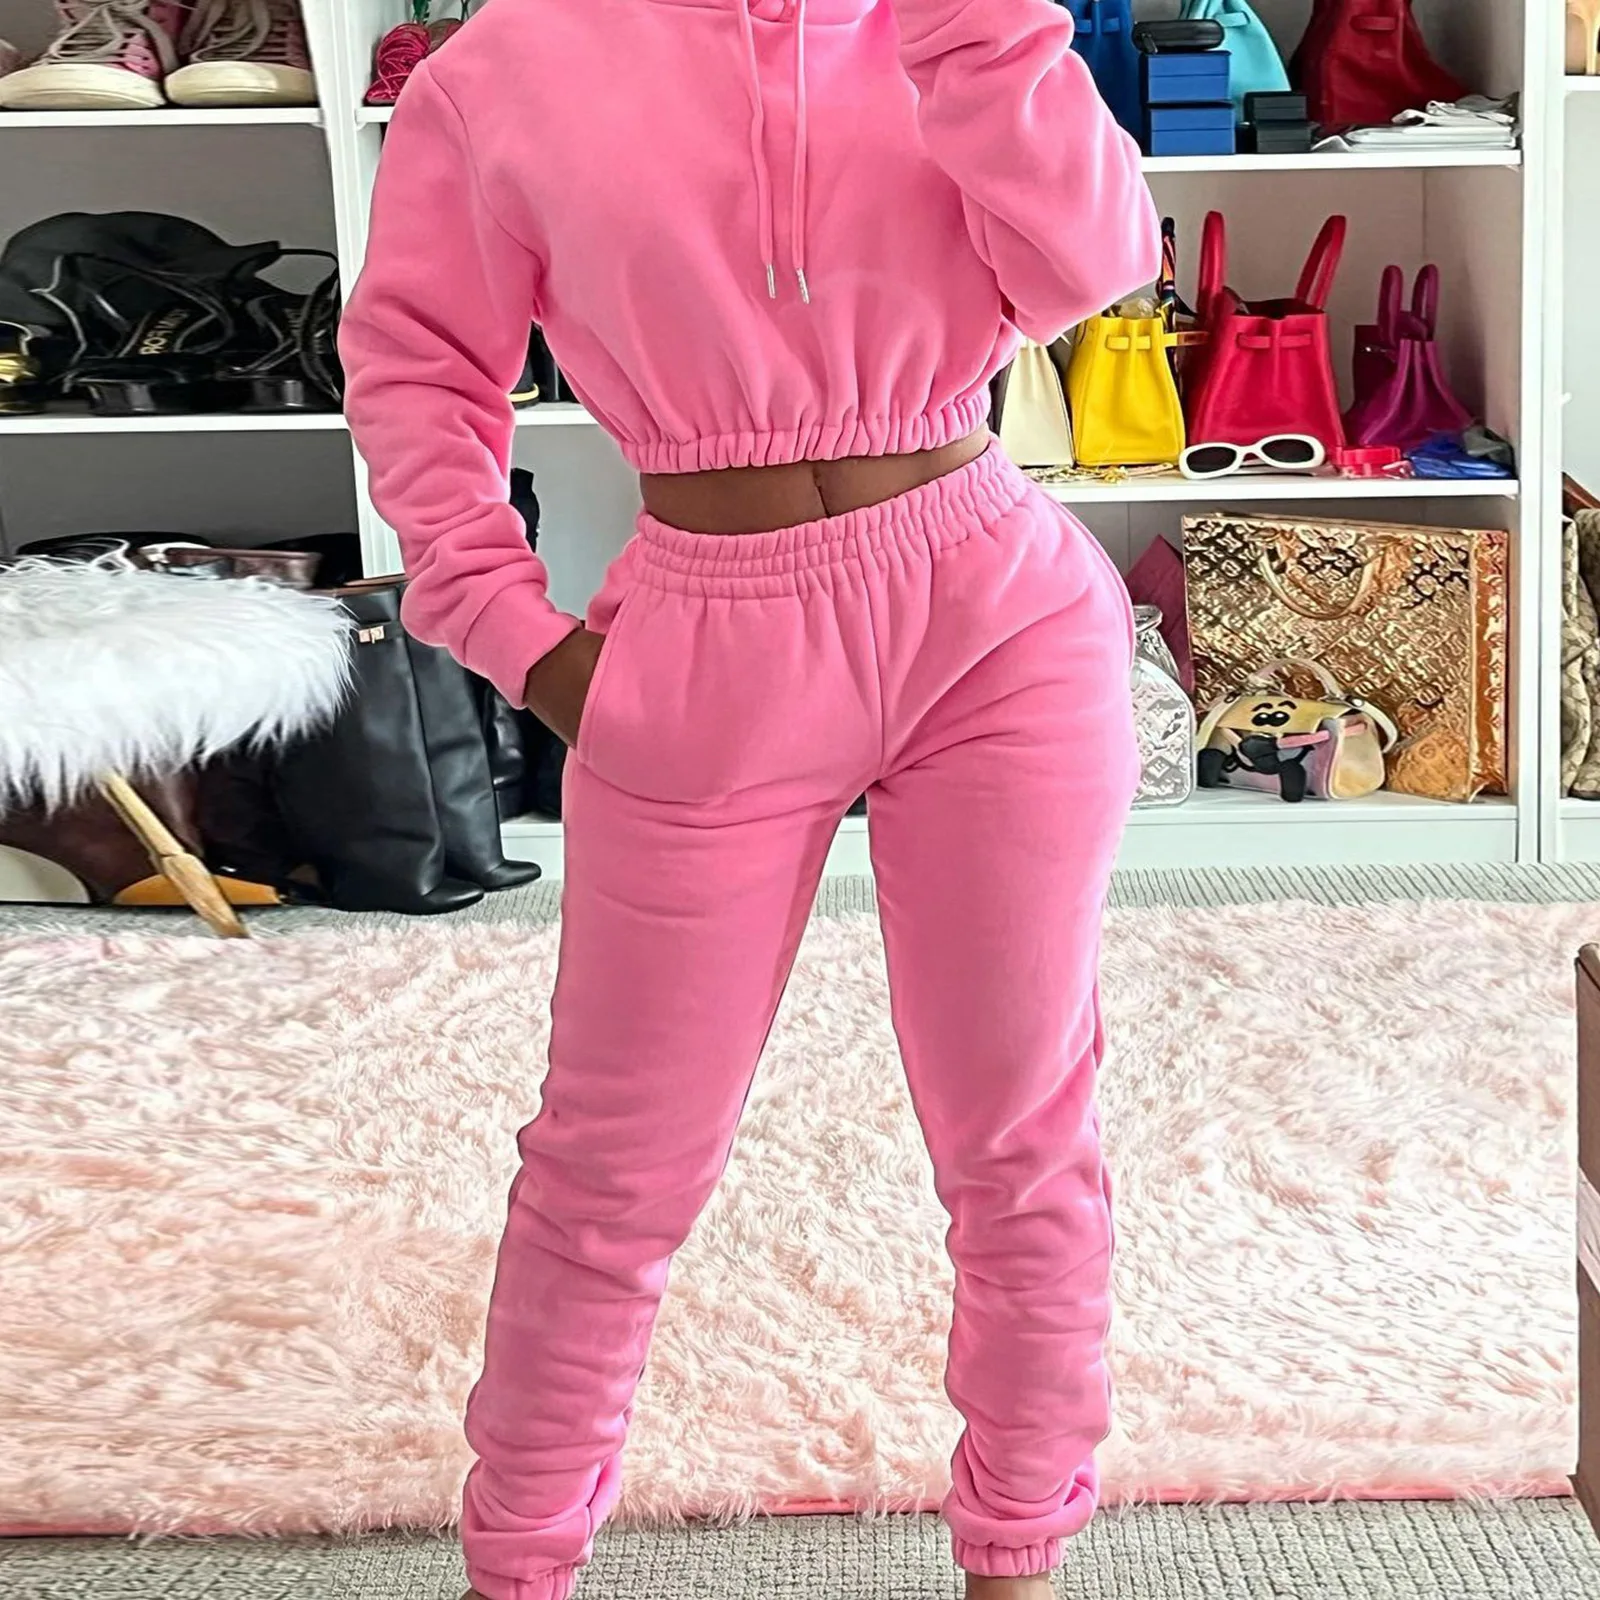 

Winter Joggers Pullover Sweatshirt Spring 2022 New Arrivals Women Sweatpants And Hoodie Clothing Sweat Suits Two Piece Pants Set, Pink,black,coffee,light blue,light gray,light yellow